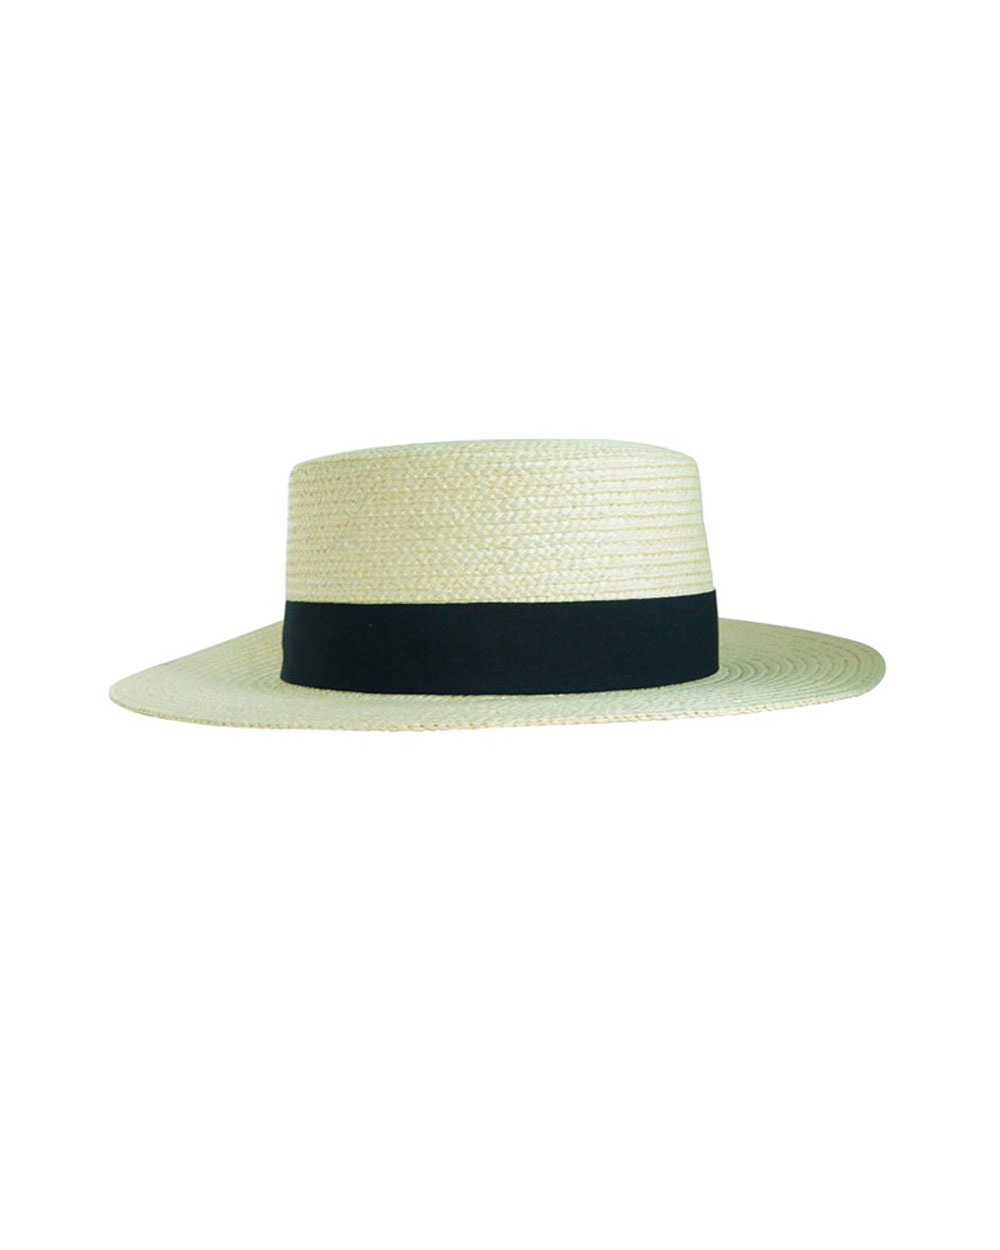 THE STRAW HAT: $89.99 from Moochi